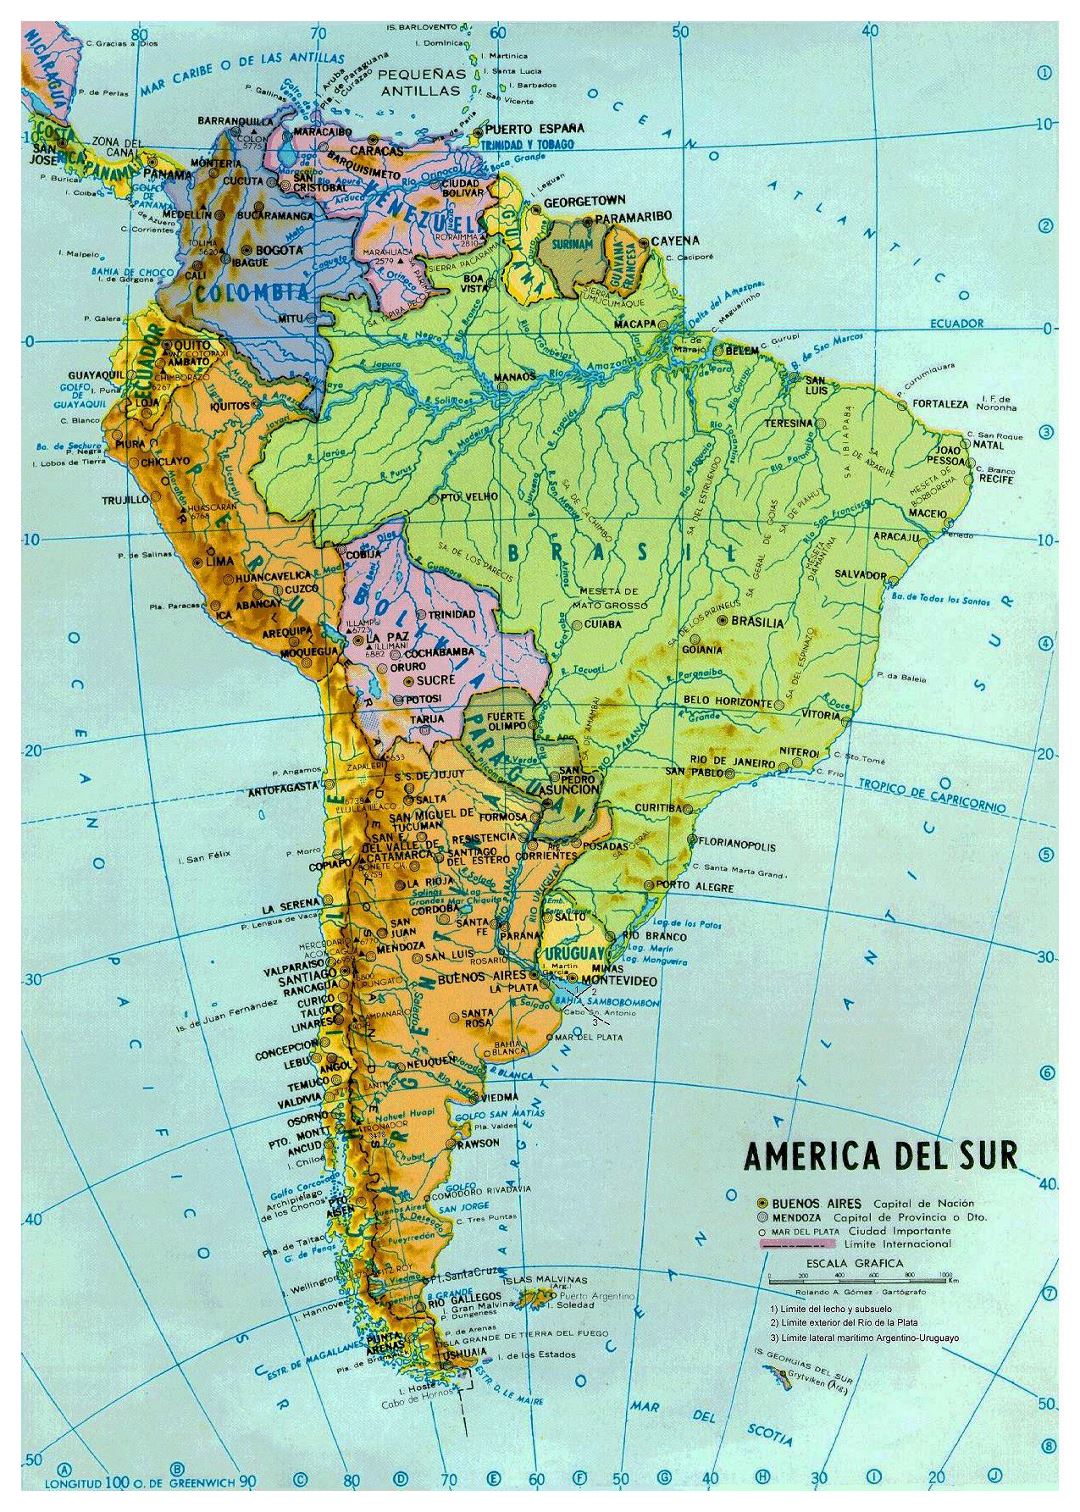 Large political and hydrographic map of South America with major cities and capitals